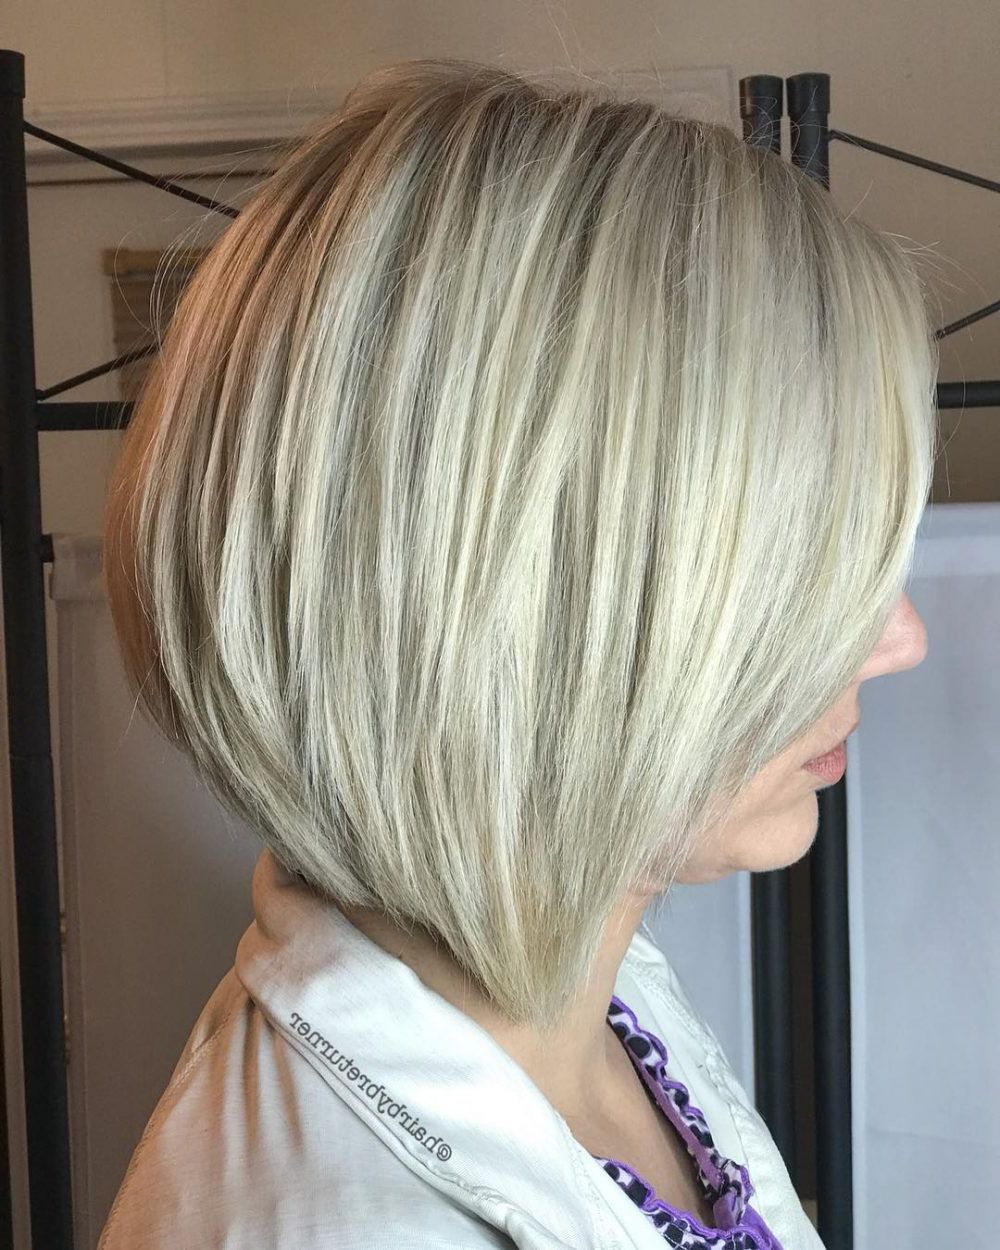 42 Sexiest Short Hairstyles For Women Over 40 In 2018 Pertaining To Short Haircuts Styles For Women Over  (View 6 of 25)